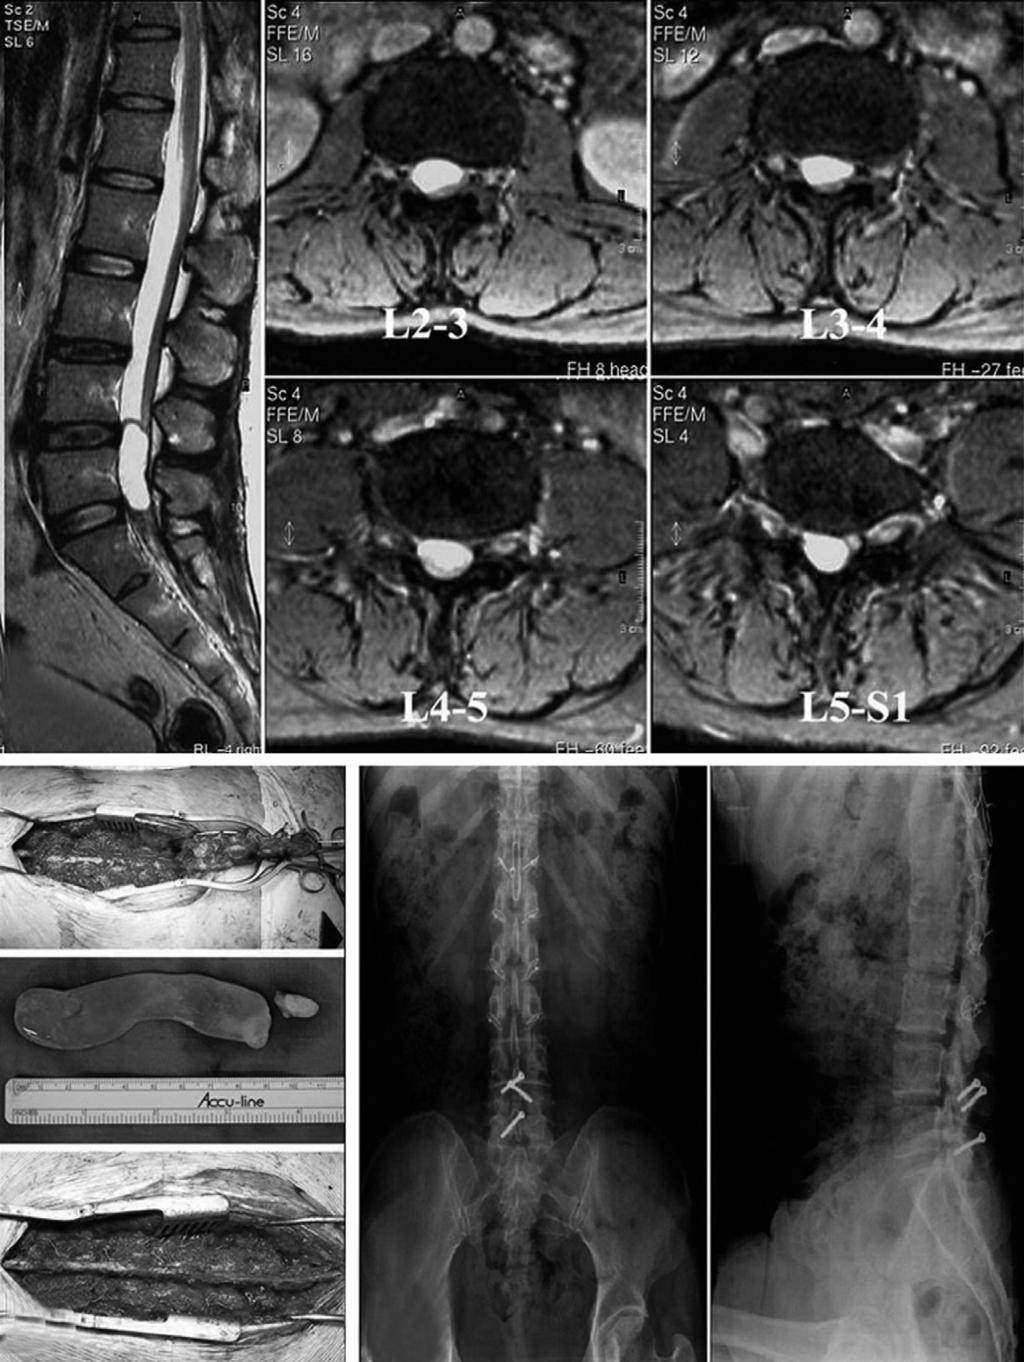 Recapping 추궁판성형술 -5 례보고 - 박원욱외 Fig. 1. (A) Preoperative MRI and plain X-ray shows type III arachoid cyst from L2 to L5 in the 43-year-old female patient. (B) Intraoperative photograph.